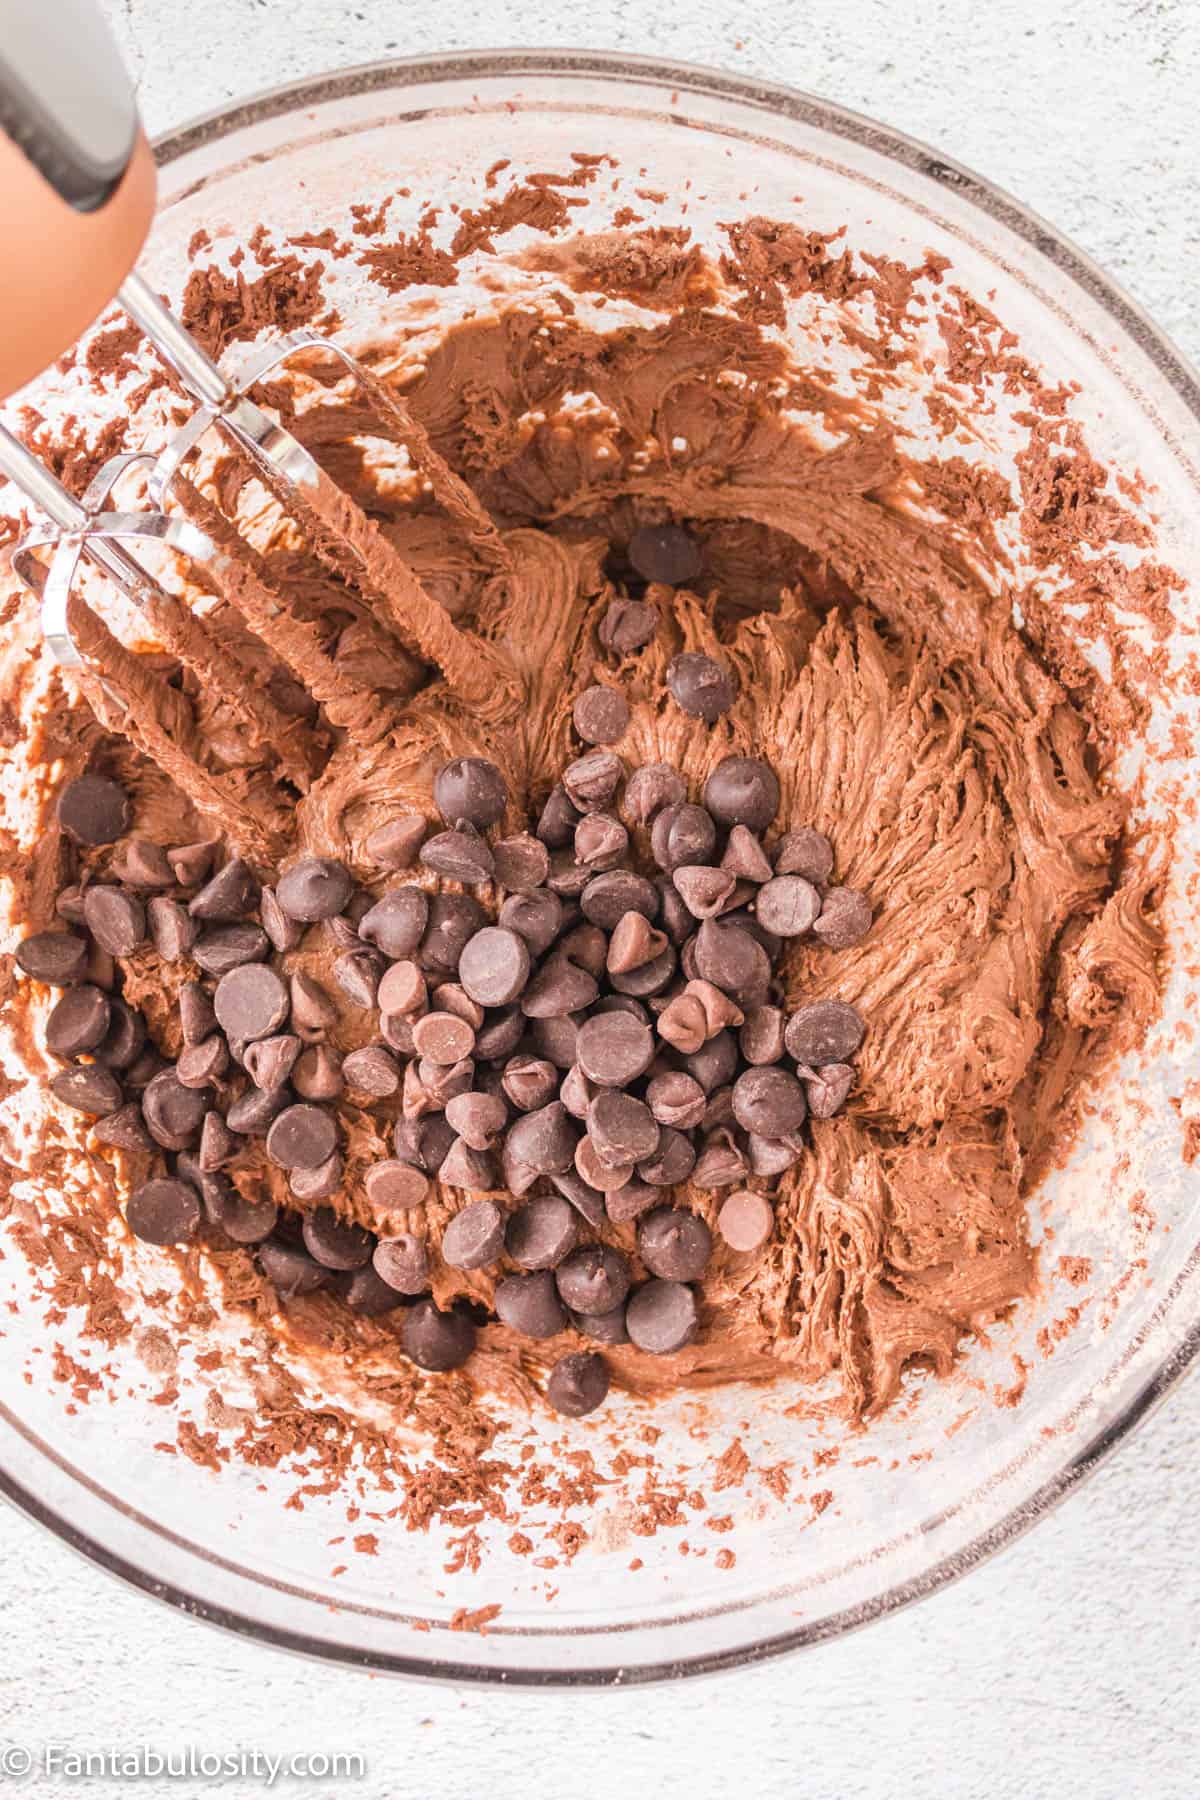 Stir in chocolate chips.